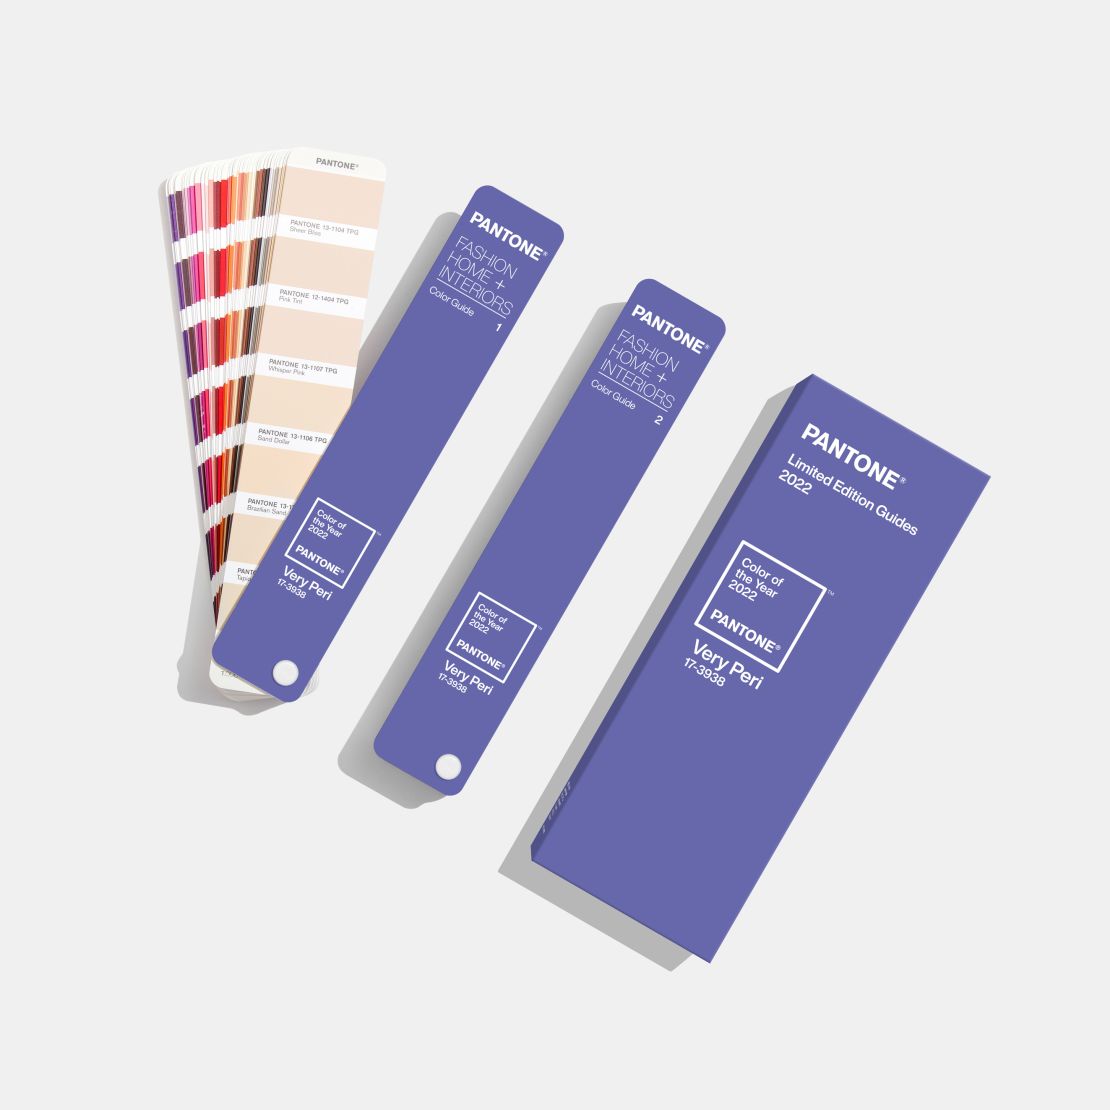 The periwinkle shade is a brand new edition to Pantone's color libray.